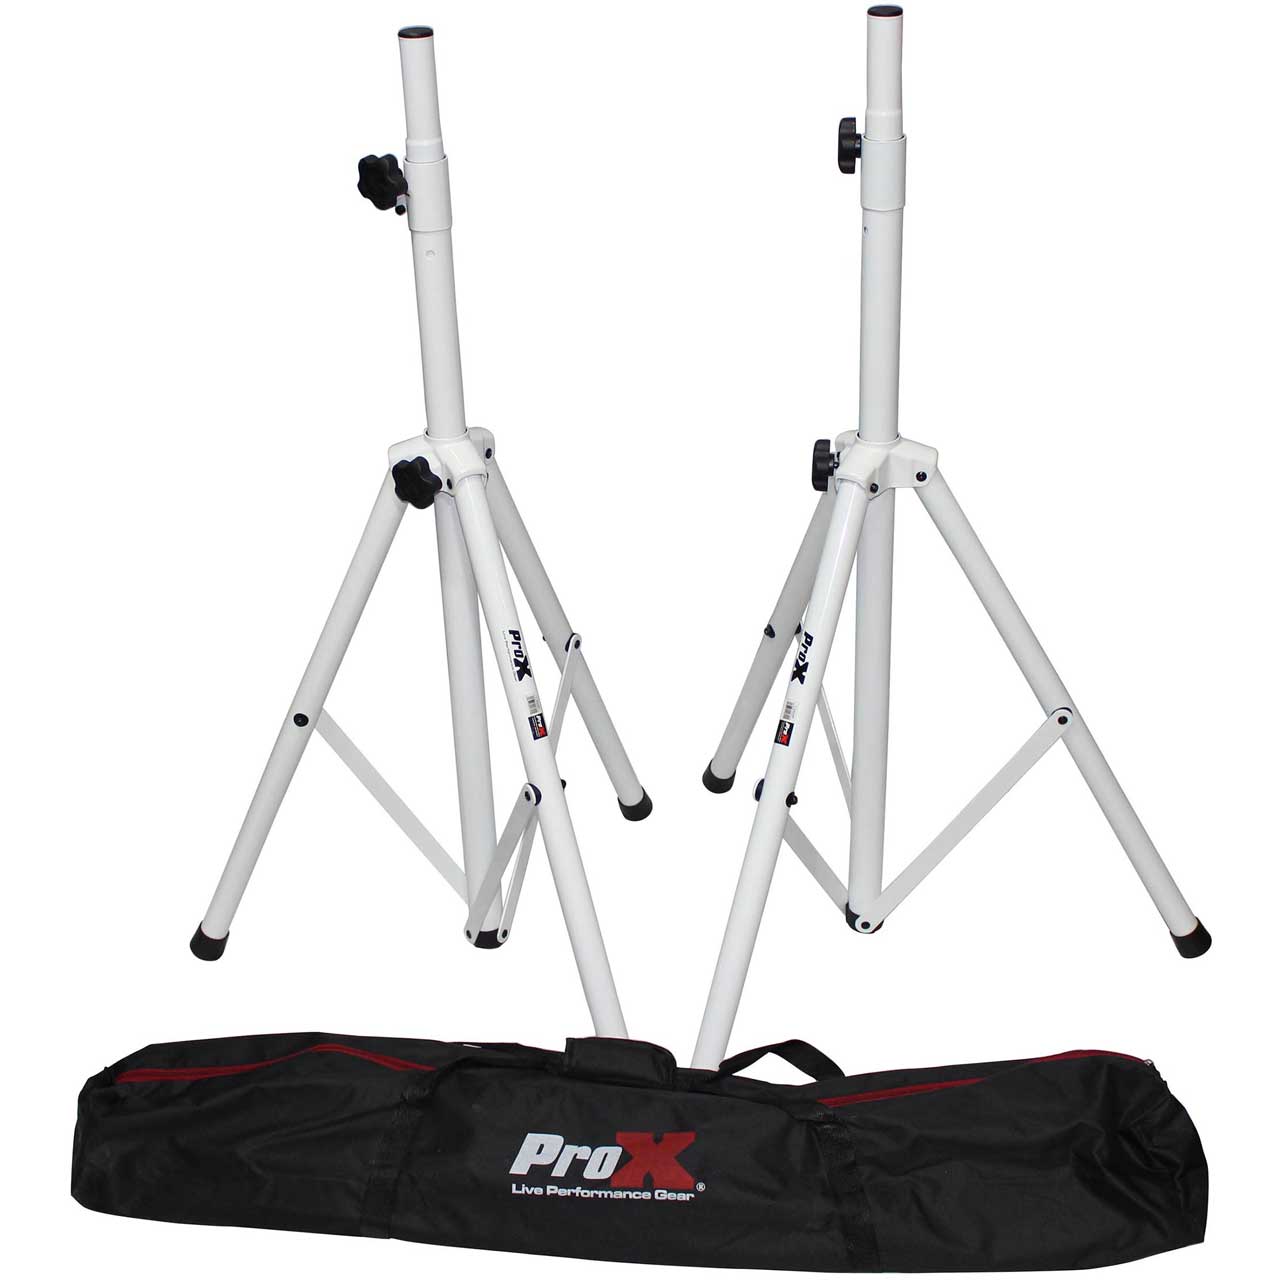 ProX T-SS28P Cloud Series Heavy-Duty All Metal Speaker Tripod Stand - Set of 2 - 4-7 ft. (44-84 Inch) - White T-SS28P